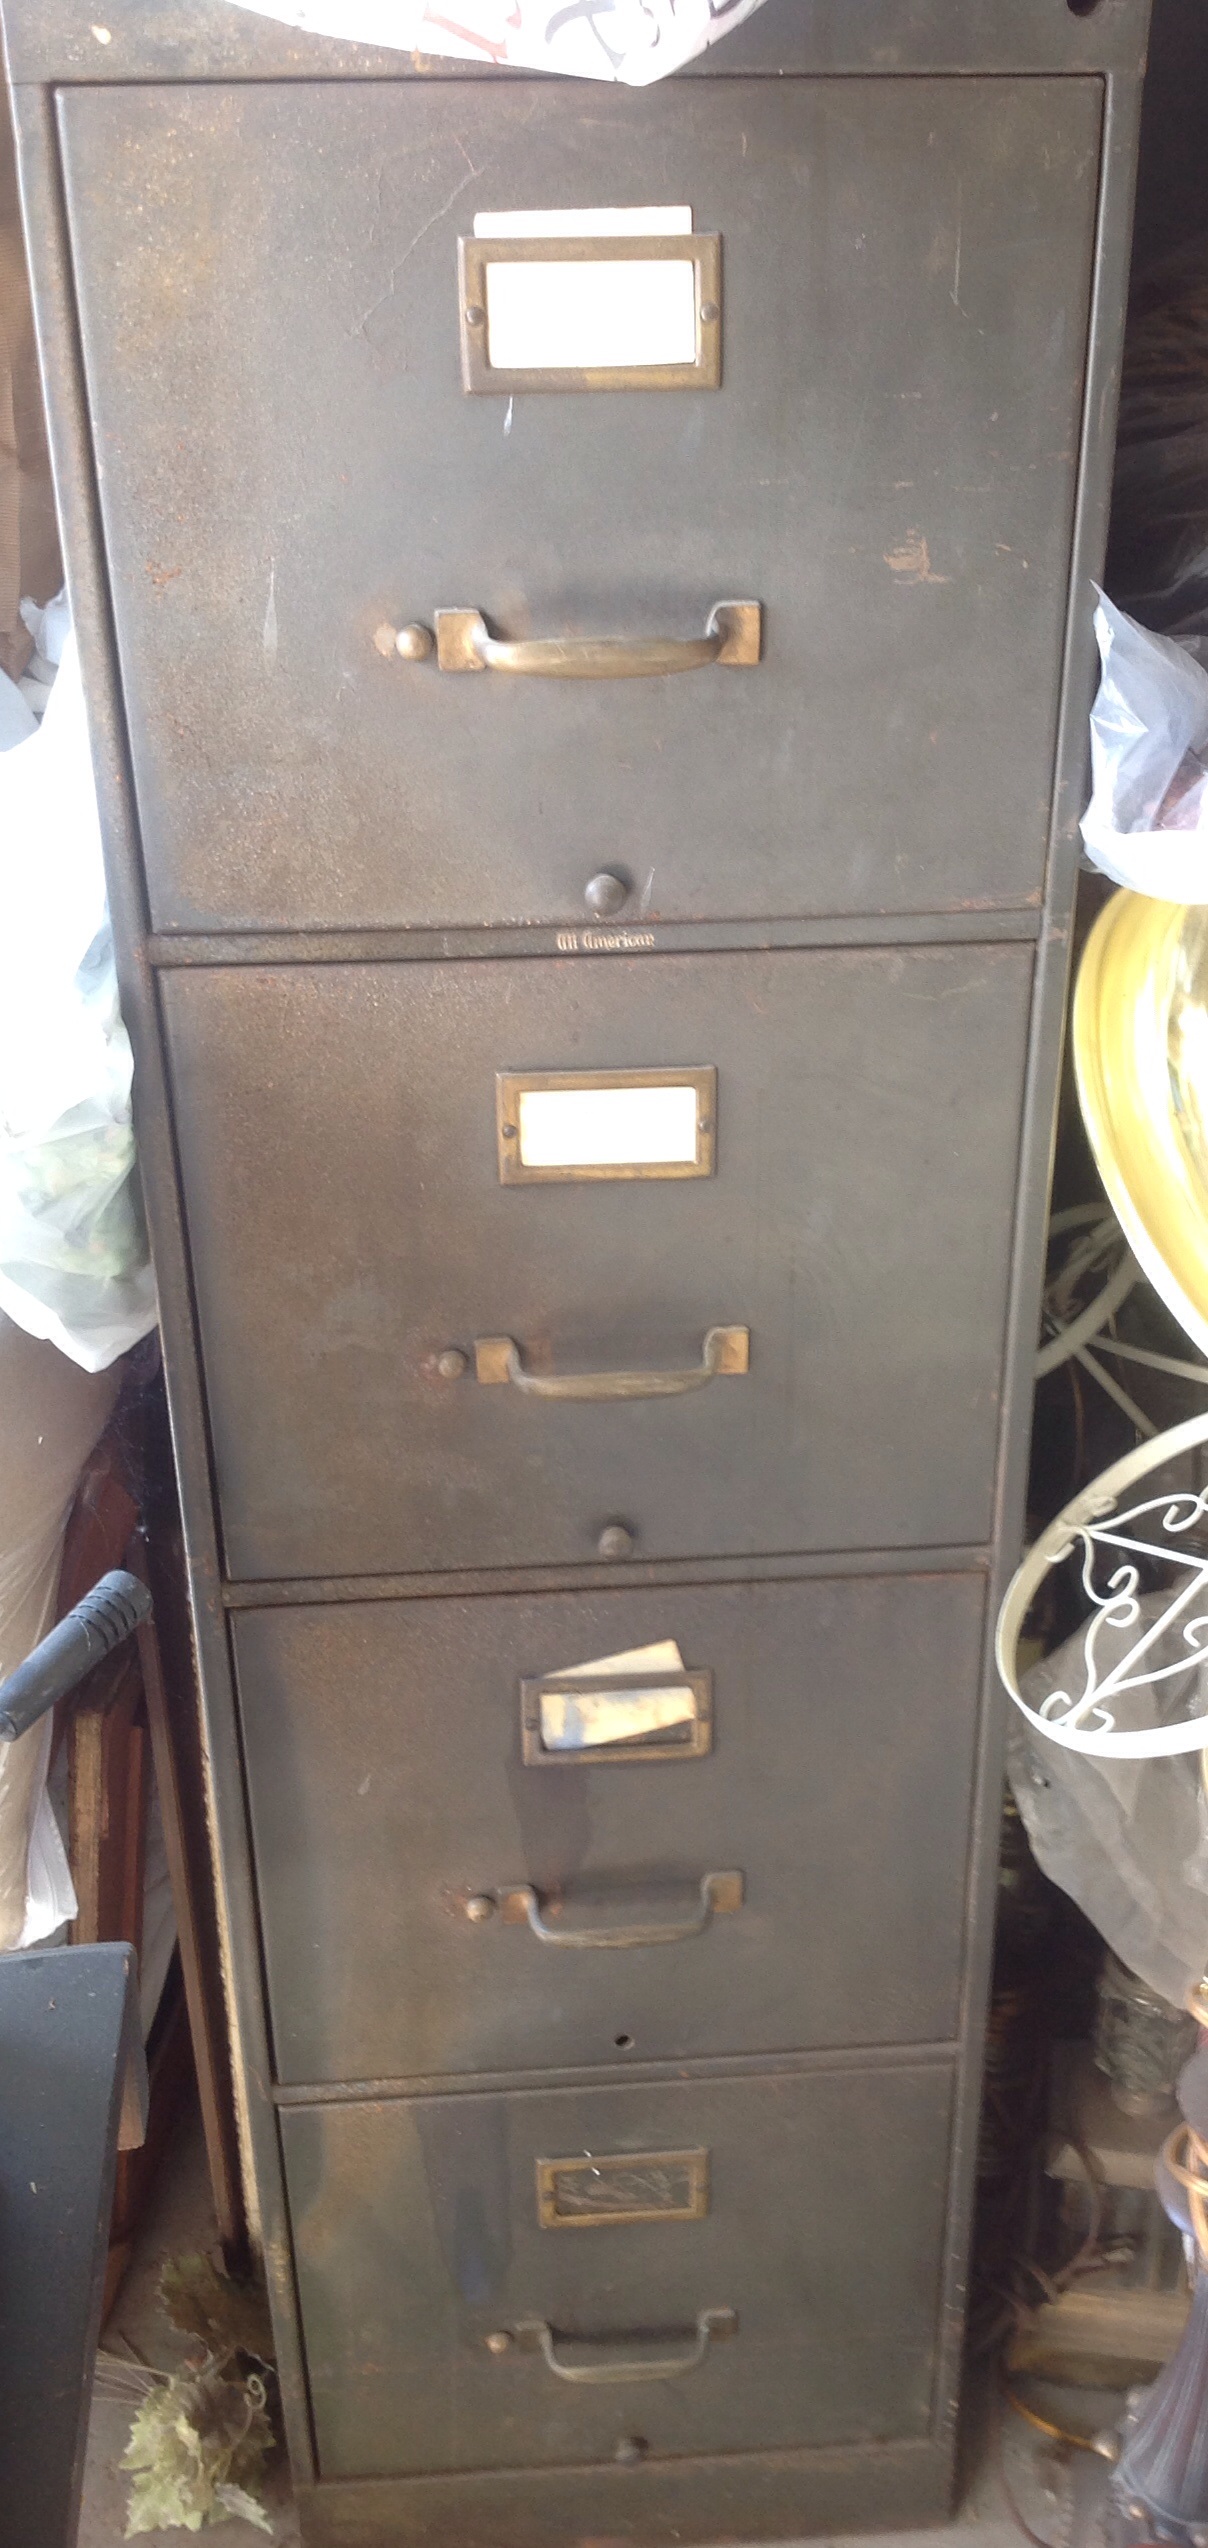 File cabinet - all American letter size